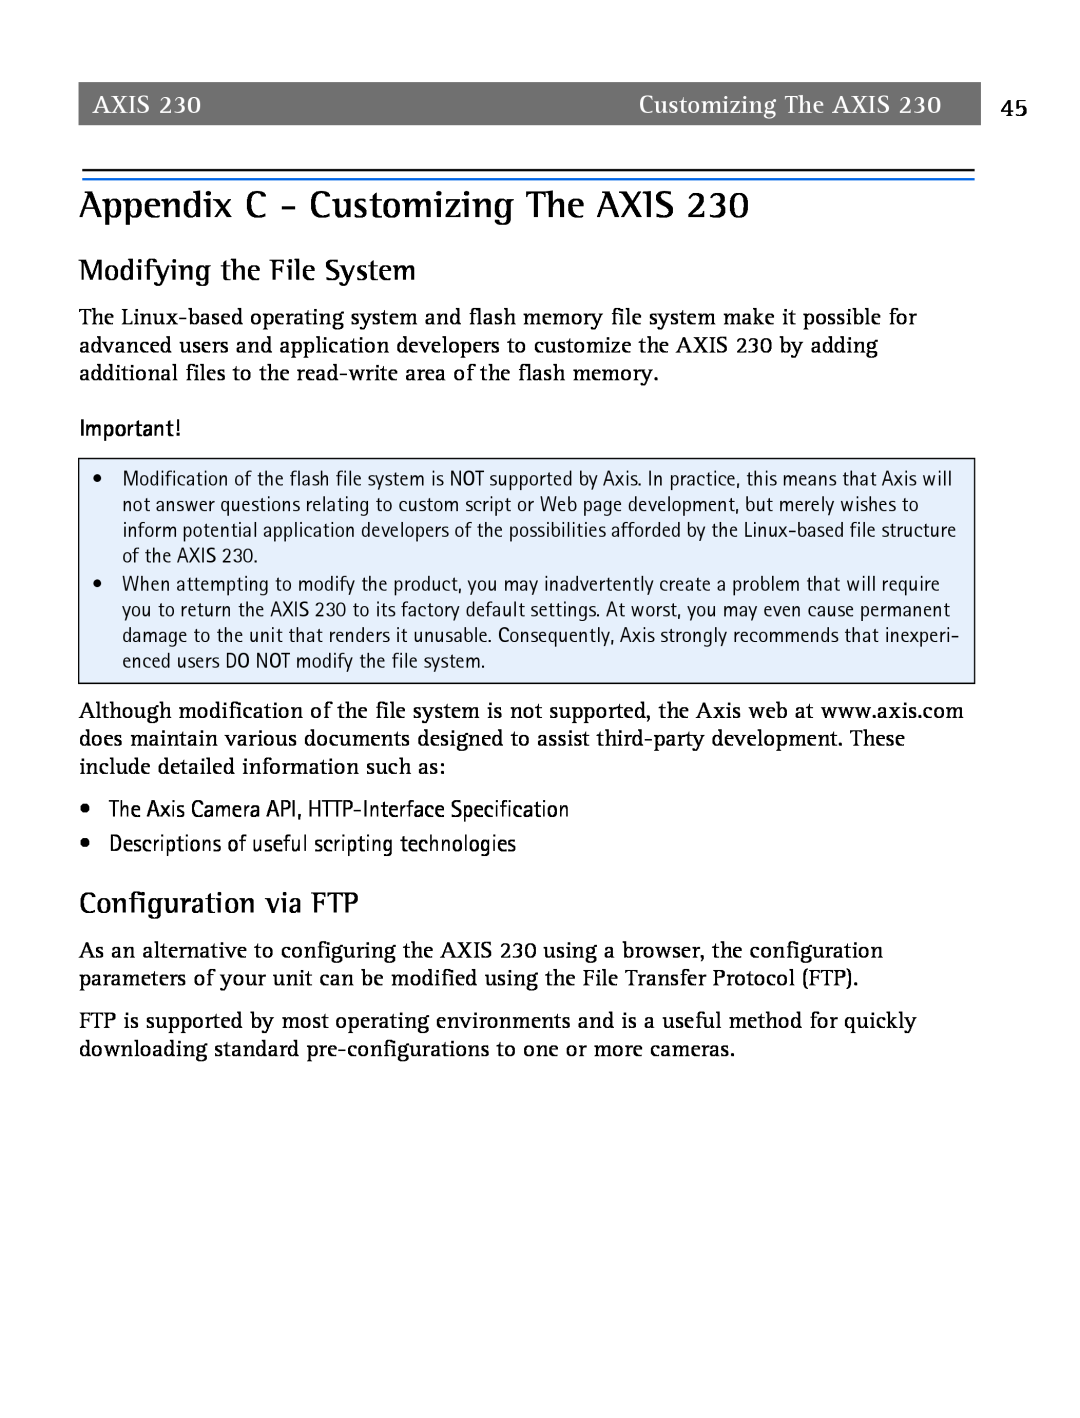 Axis Communications 2 user manual Appendix C - Customizing The AXIS, Modifying the File System, Configuration via FTP, Axis 